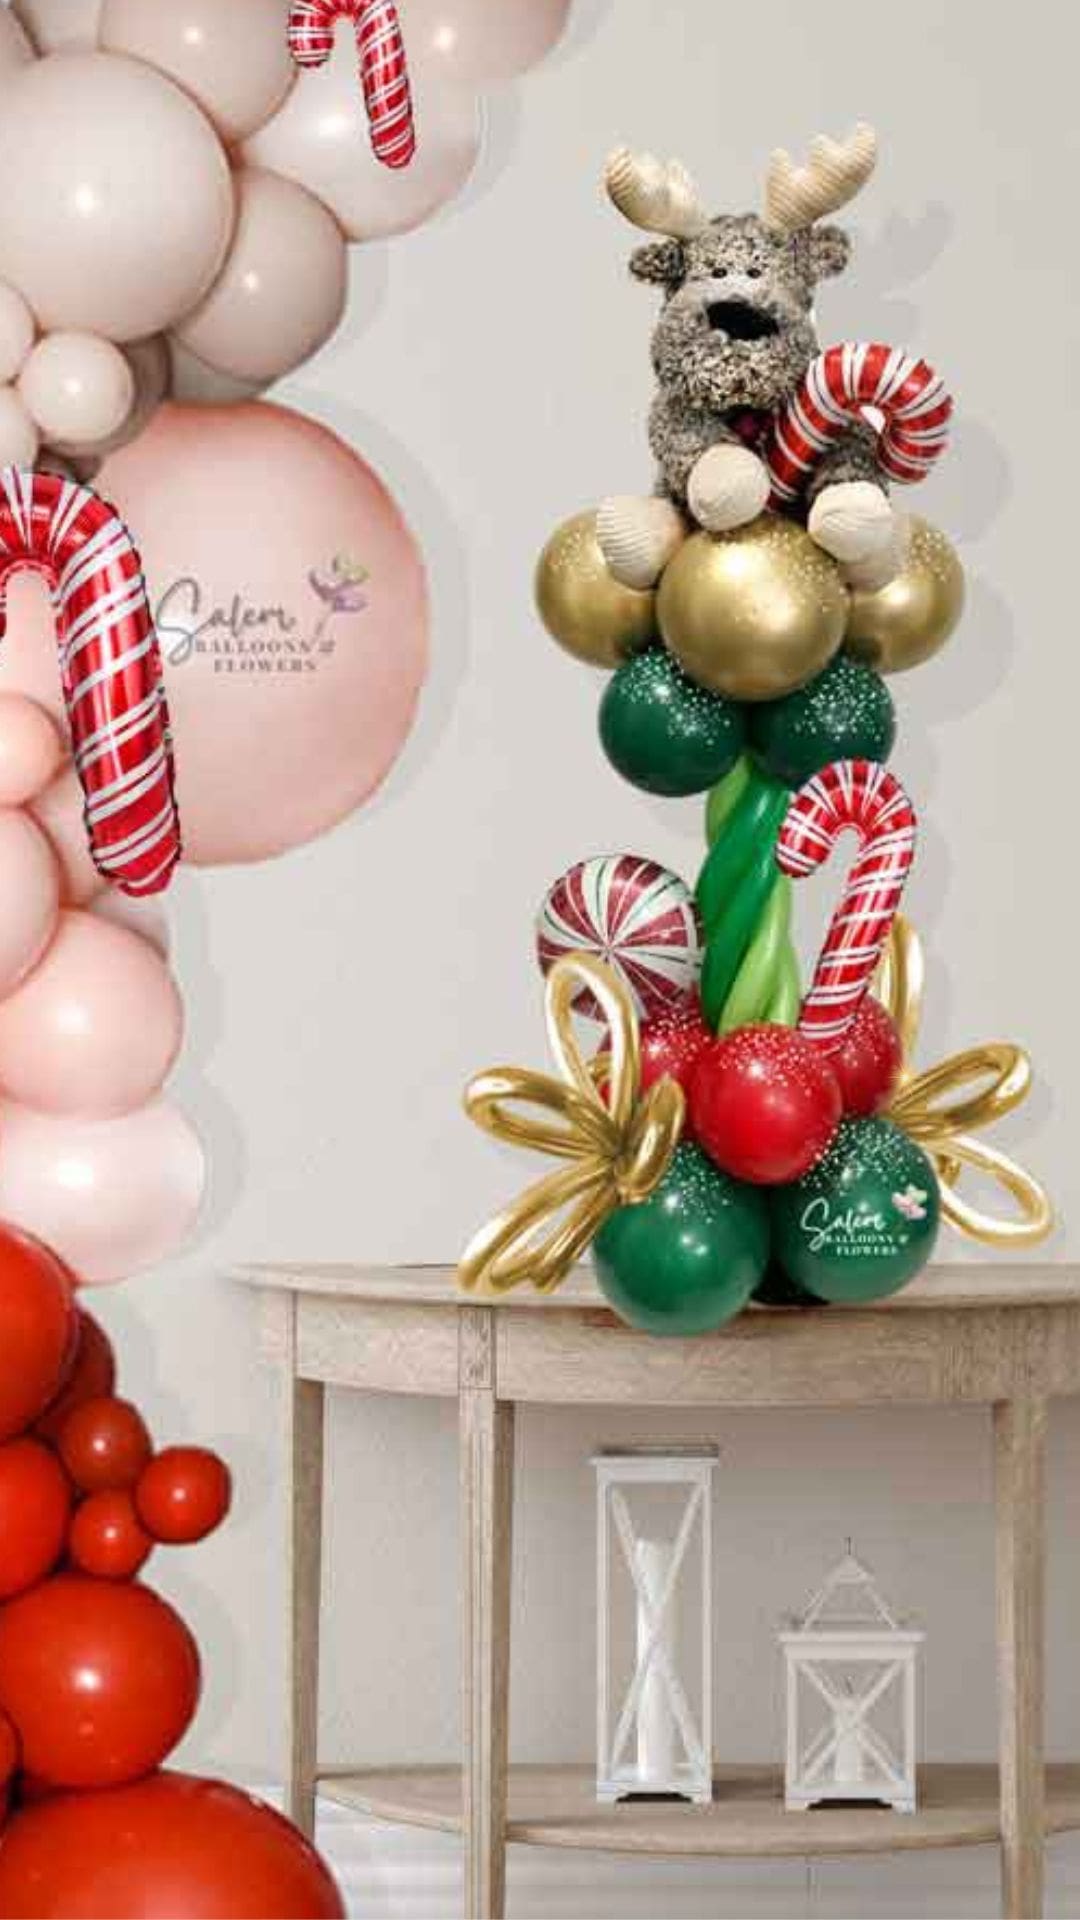 Christmas balloon decor, featuring a half column with a reindeer plush. Christmas balloons Salem Oregon and nearby cities.